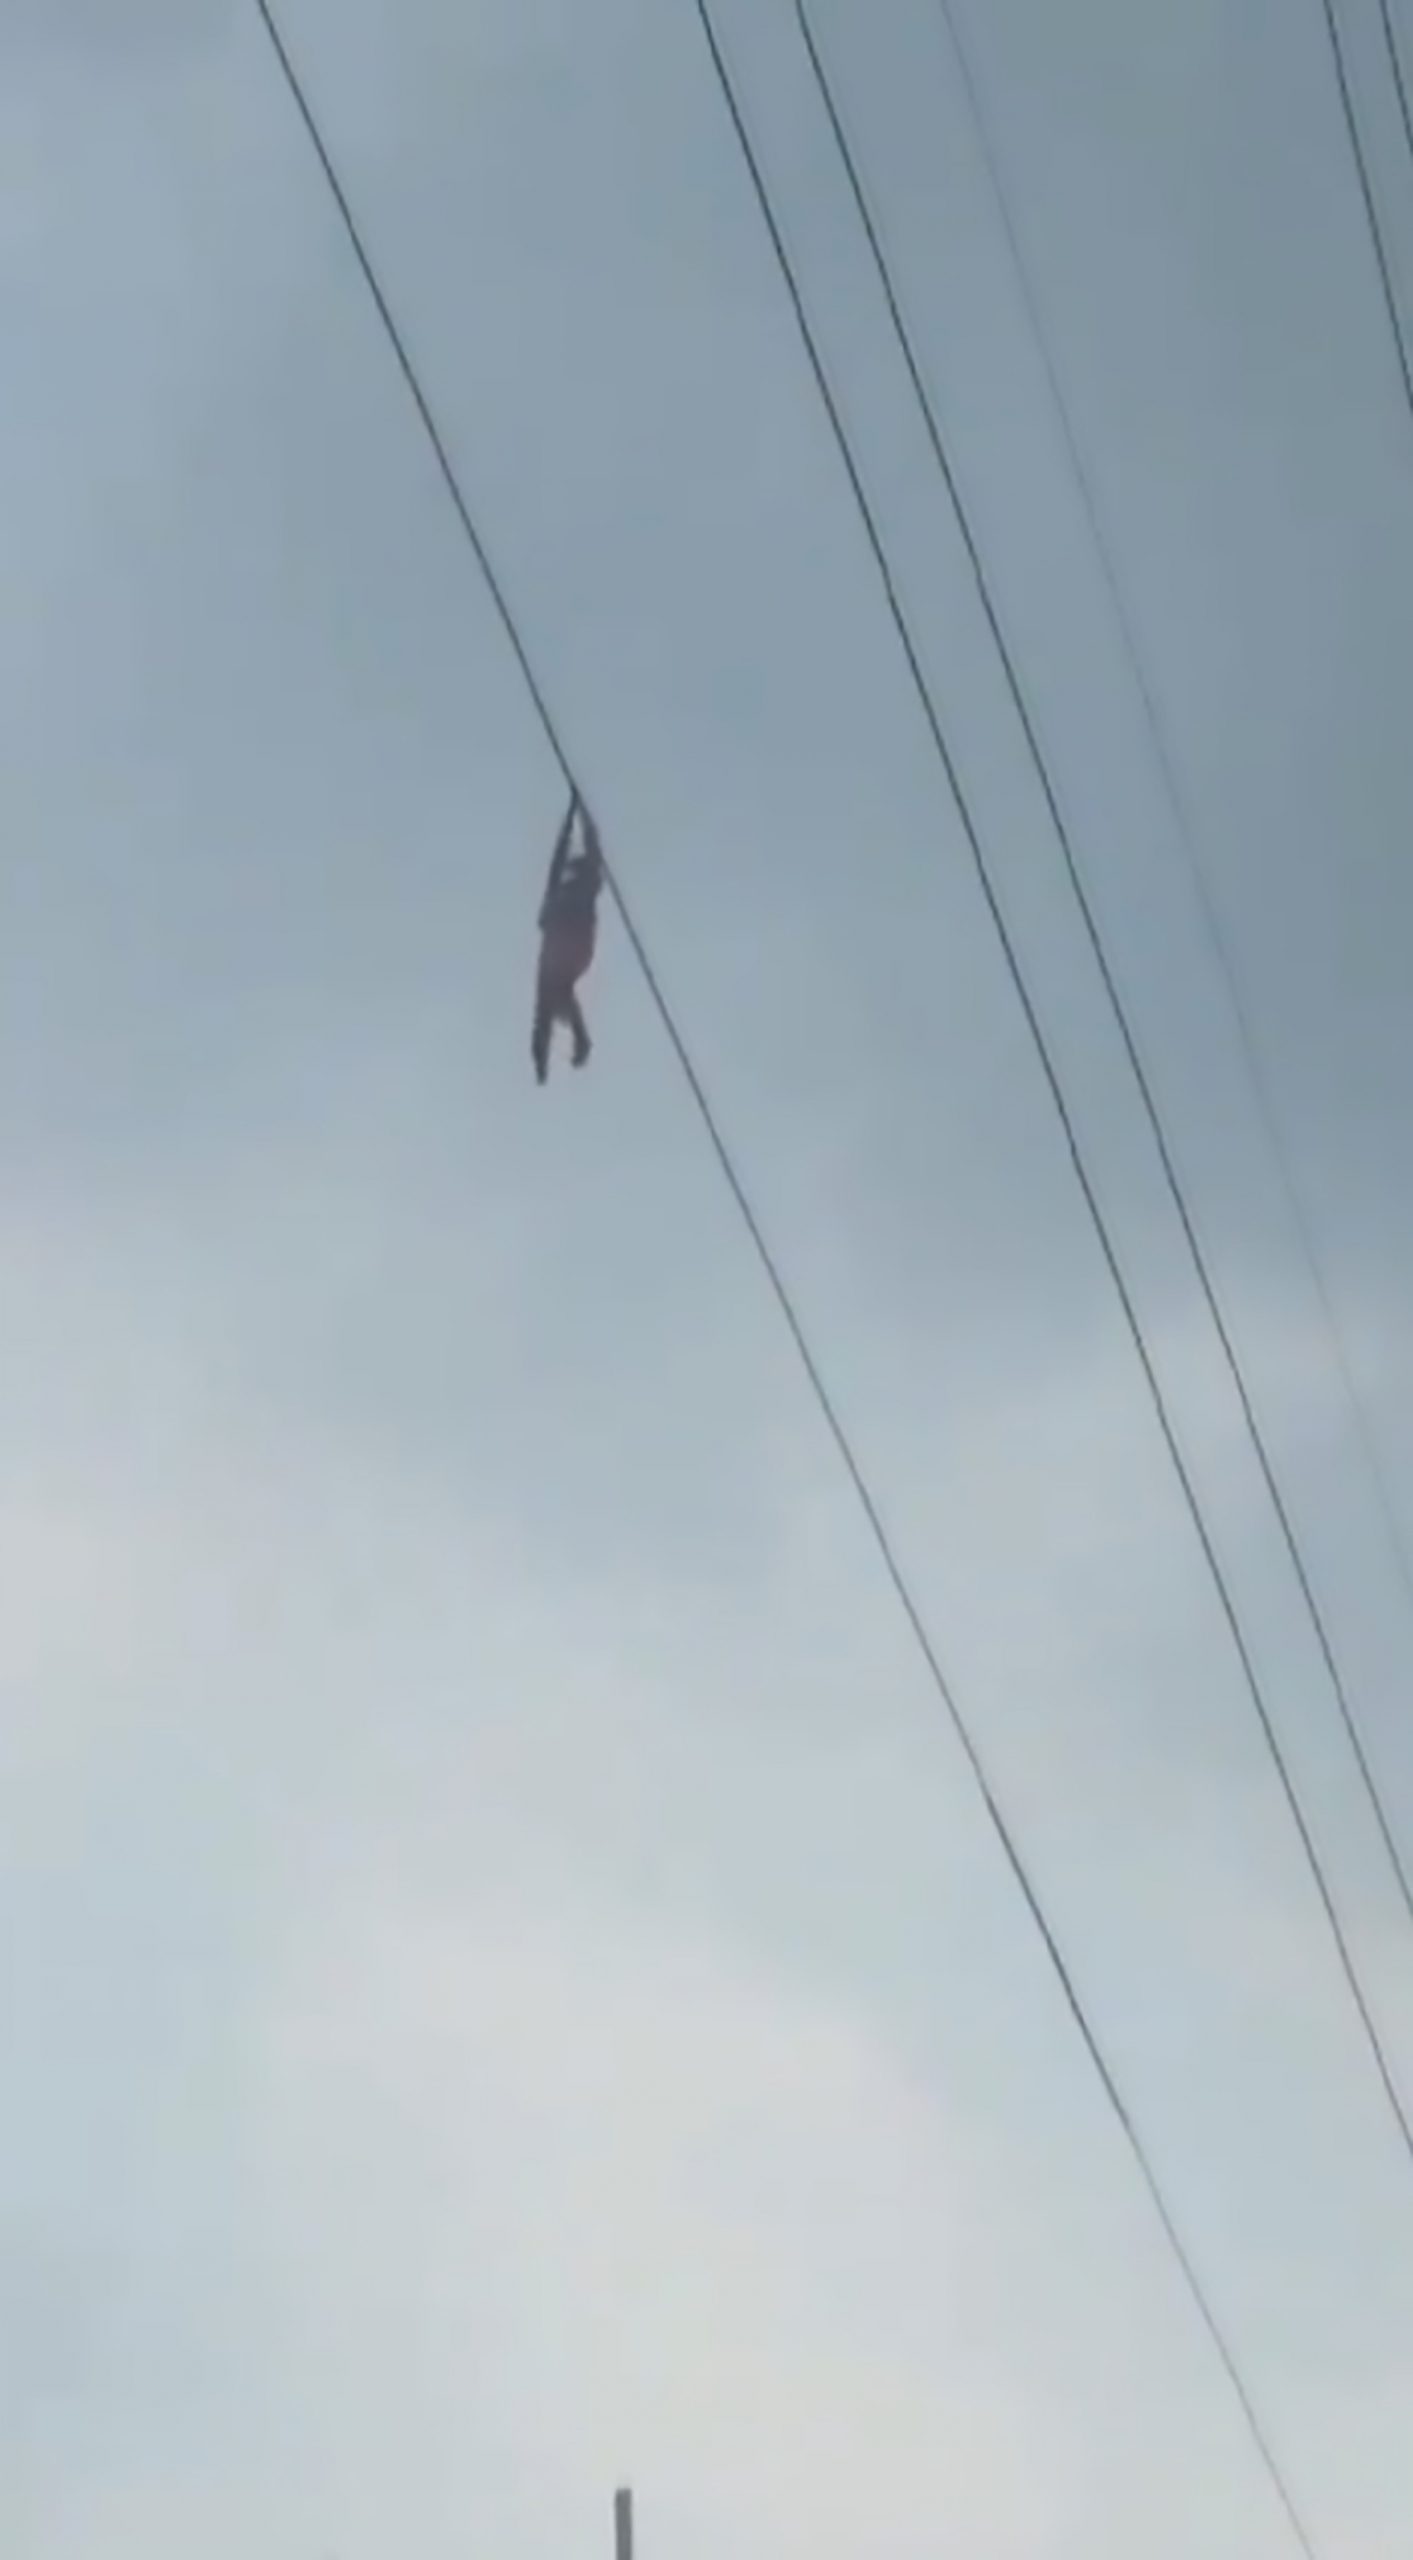 Read more about the article 9yo Girl Left Dangling 50ft In Air From Power Cable